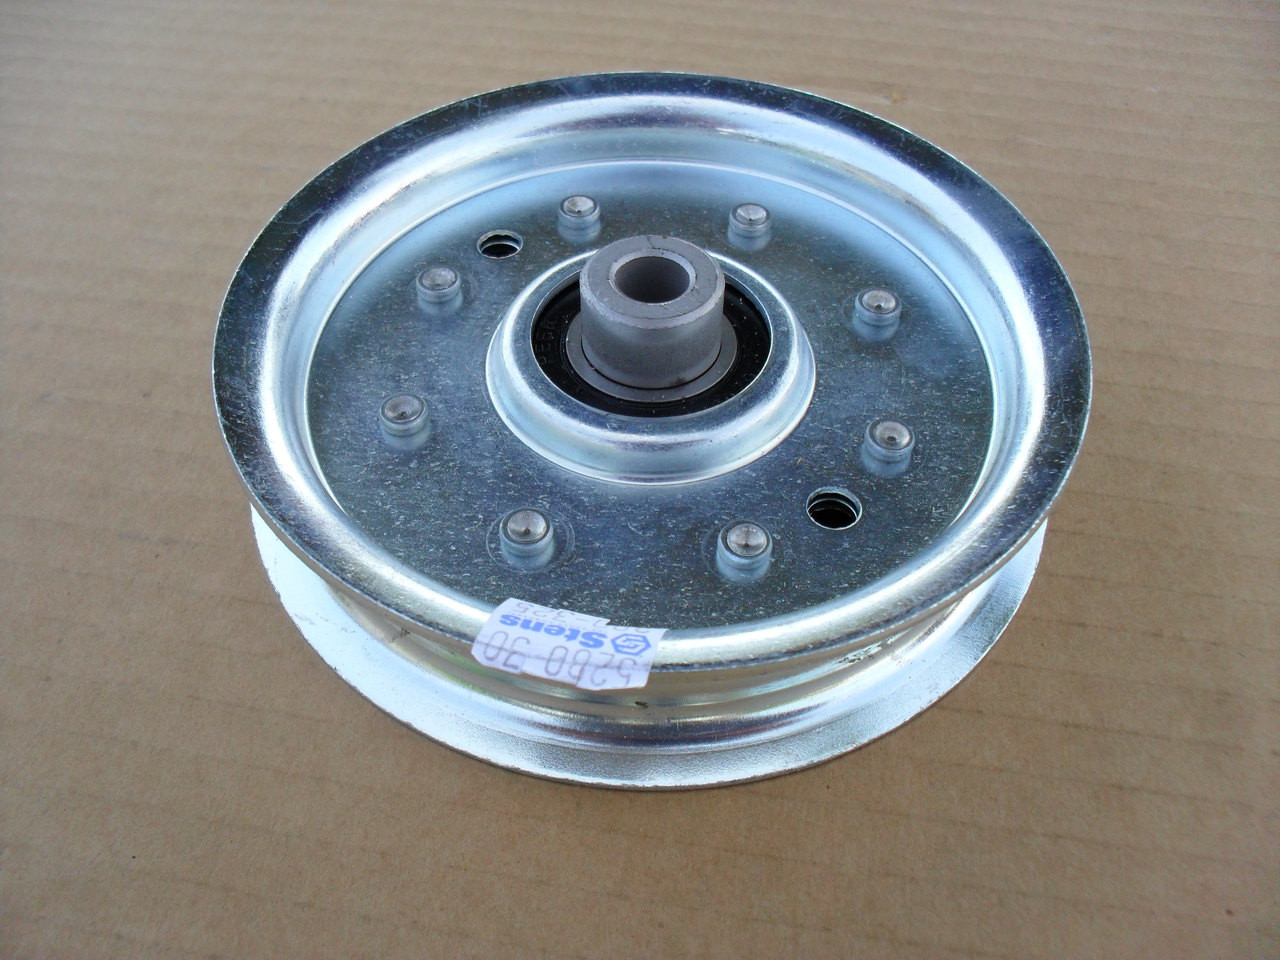 Flat Idler Pulley for Ferris 1521002, 5021002, 15-21002 OD: 4-5/8", ID: 3/8" Made In USA